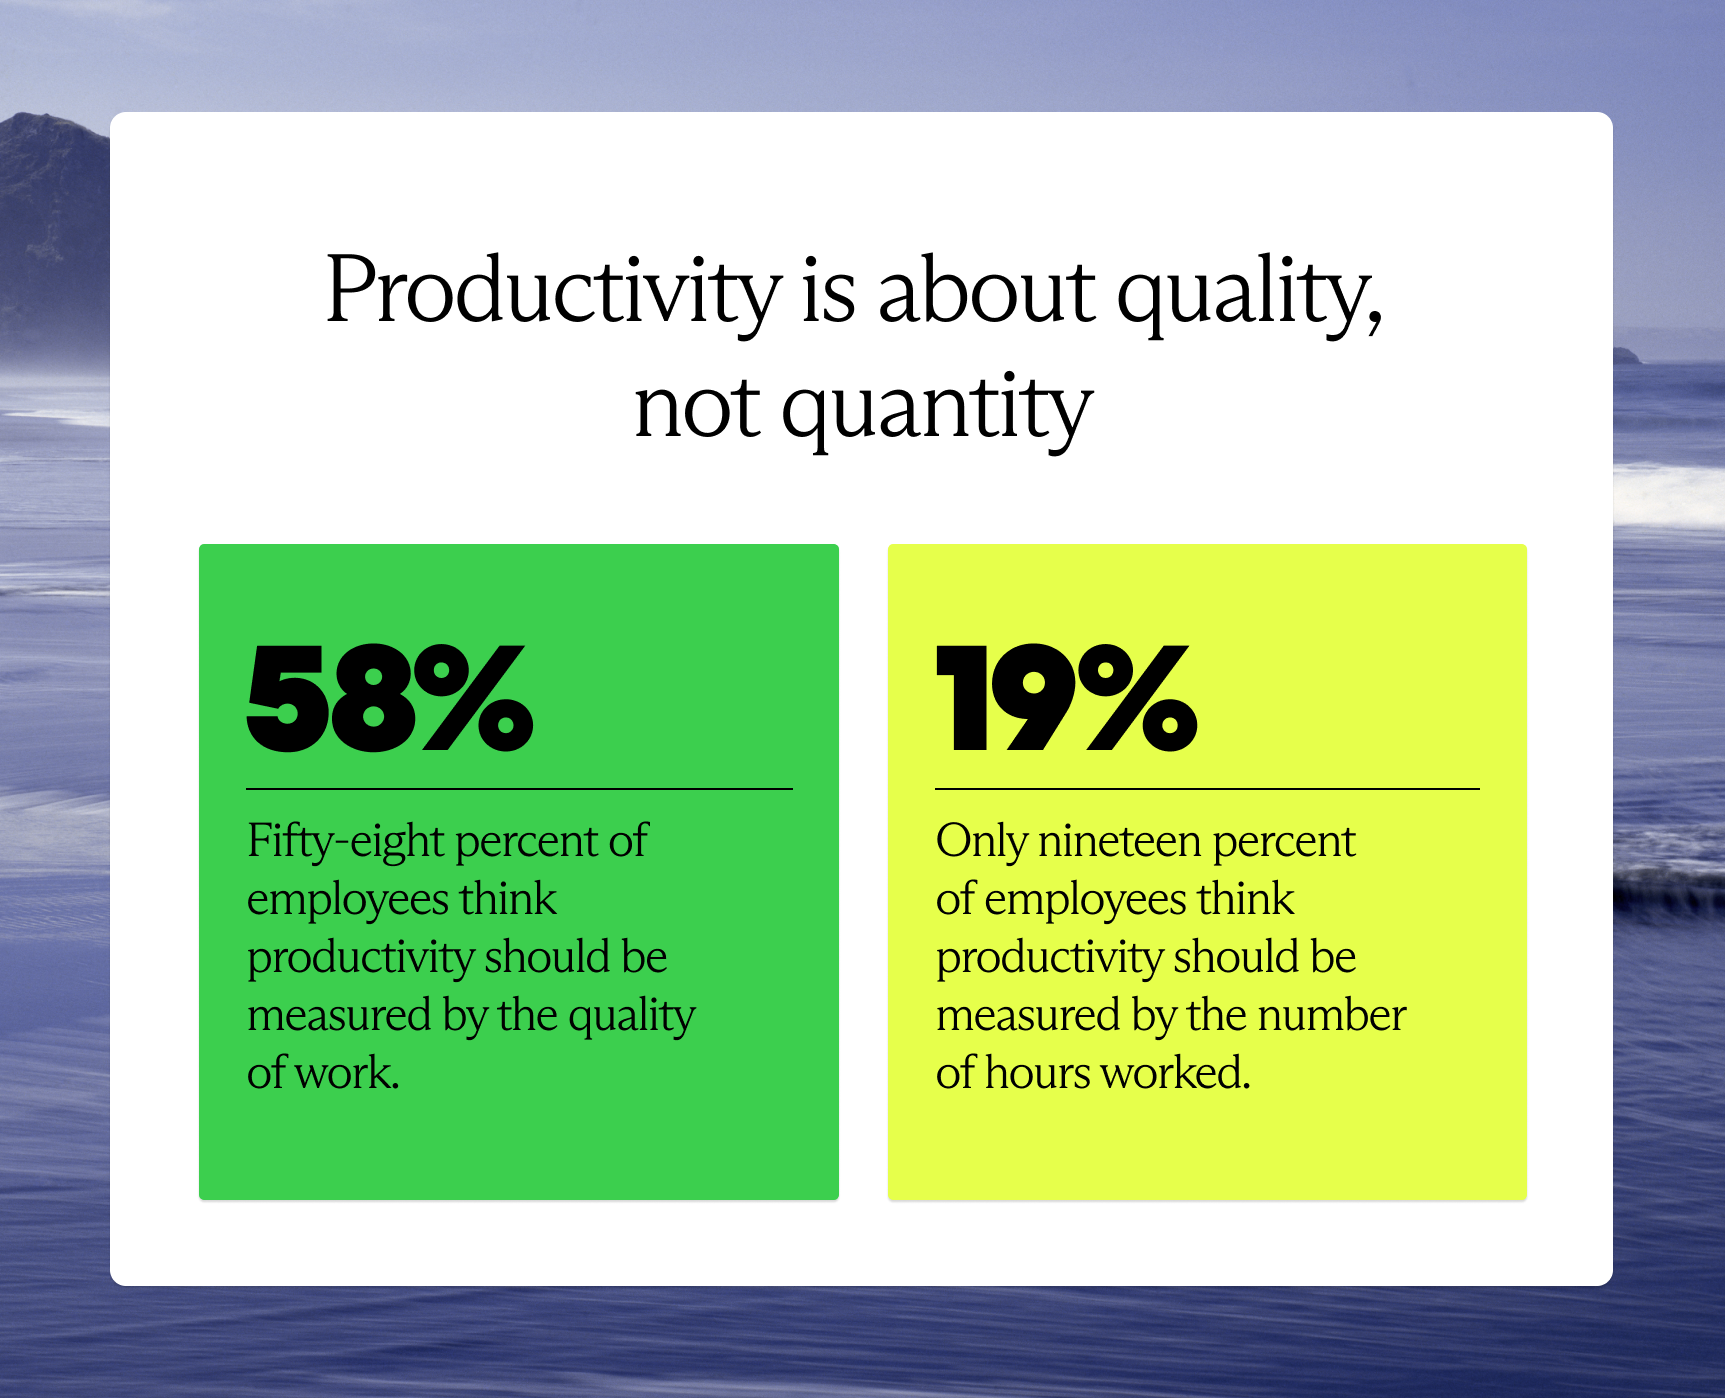 Productivity is about quality, not quantity